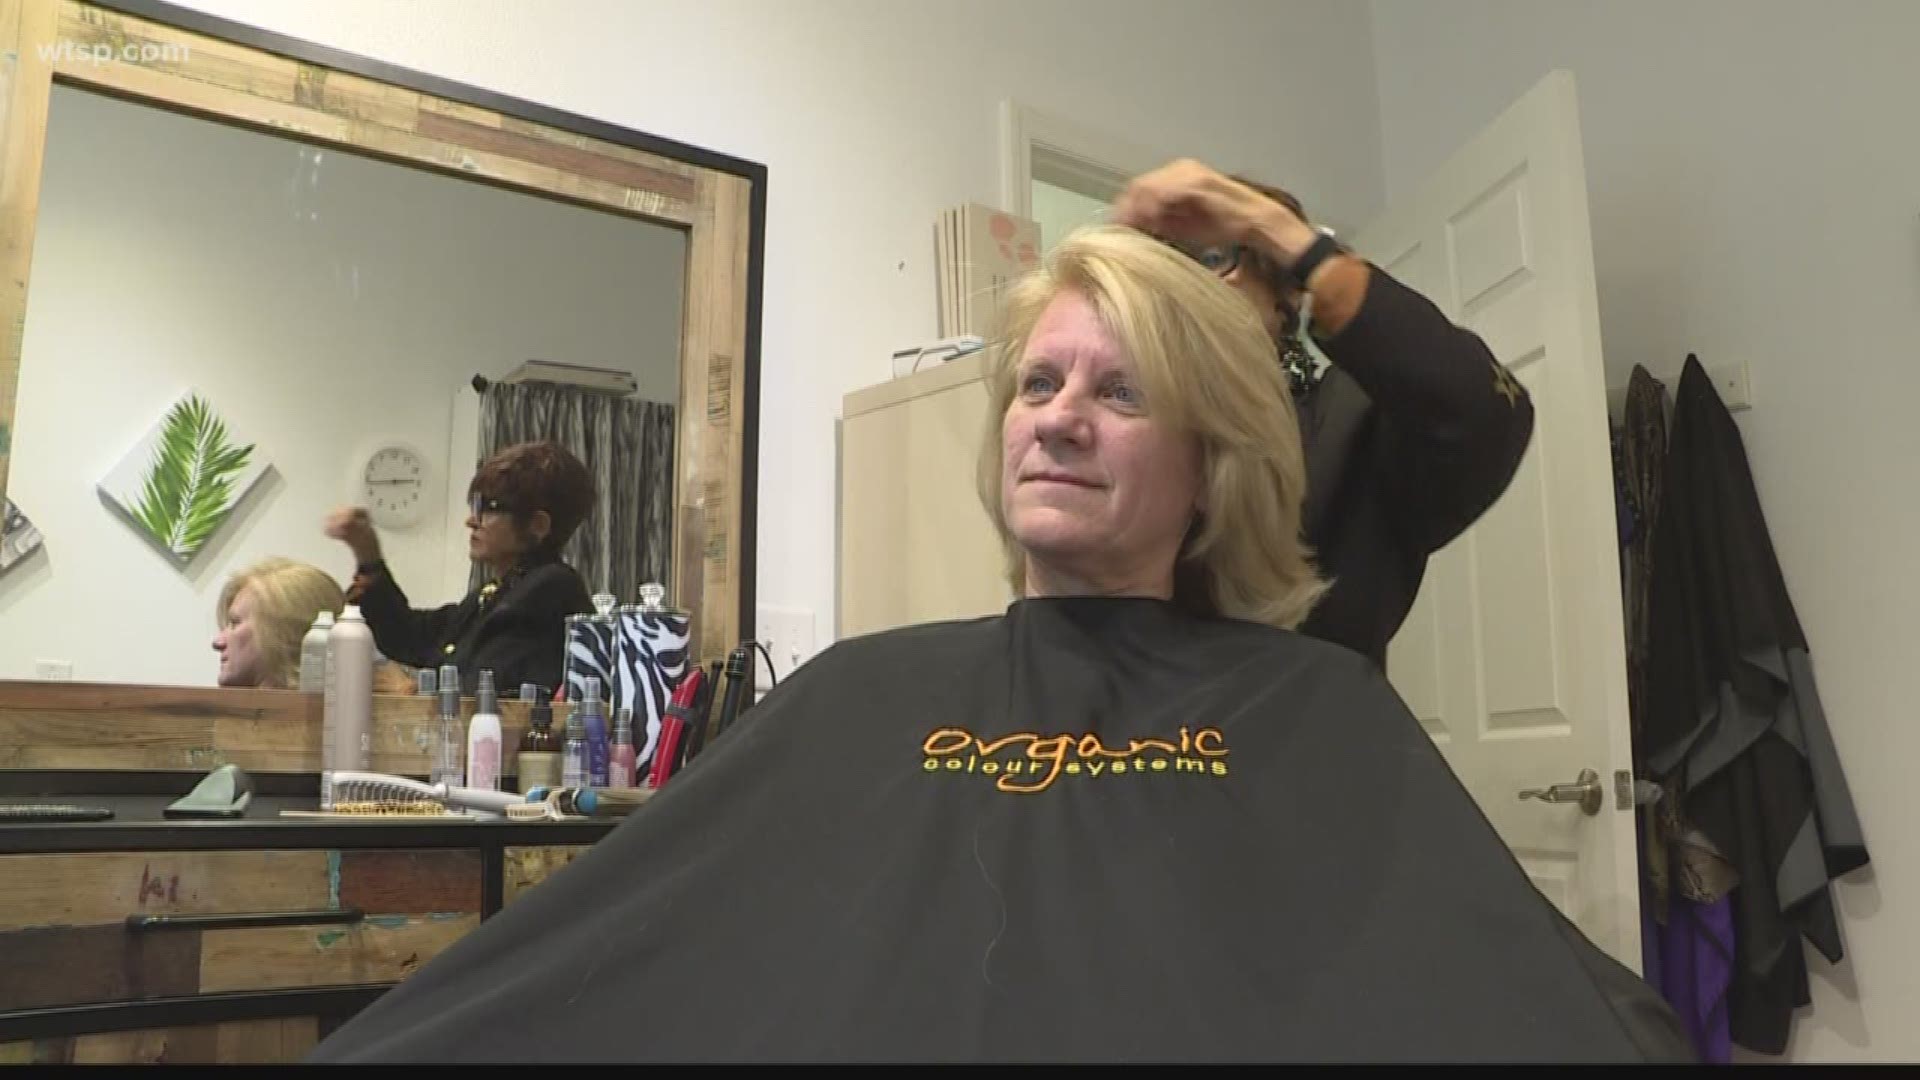 10News Anchor Allison Kropff went there to see why they think organic should be the new hair trend.